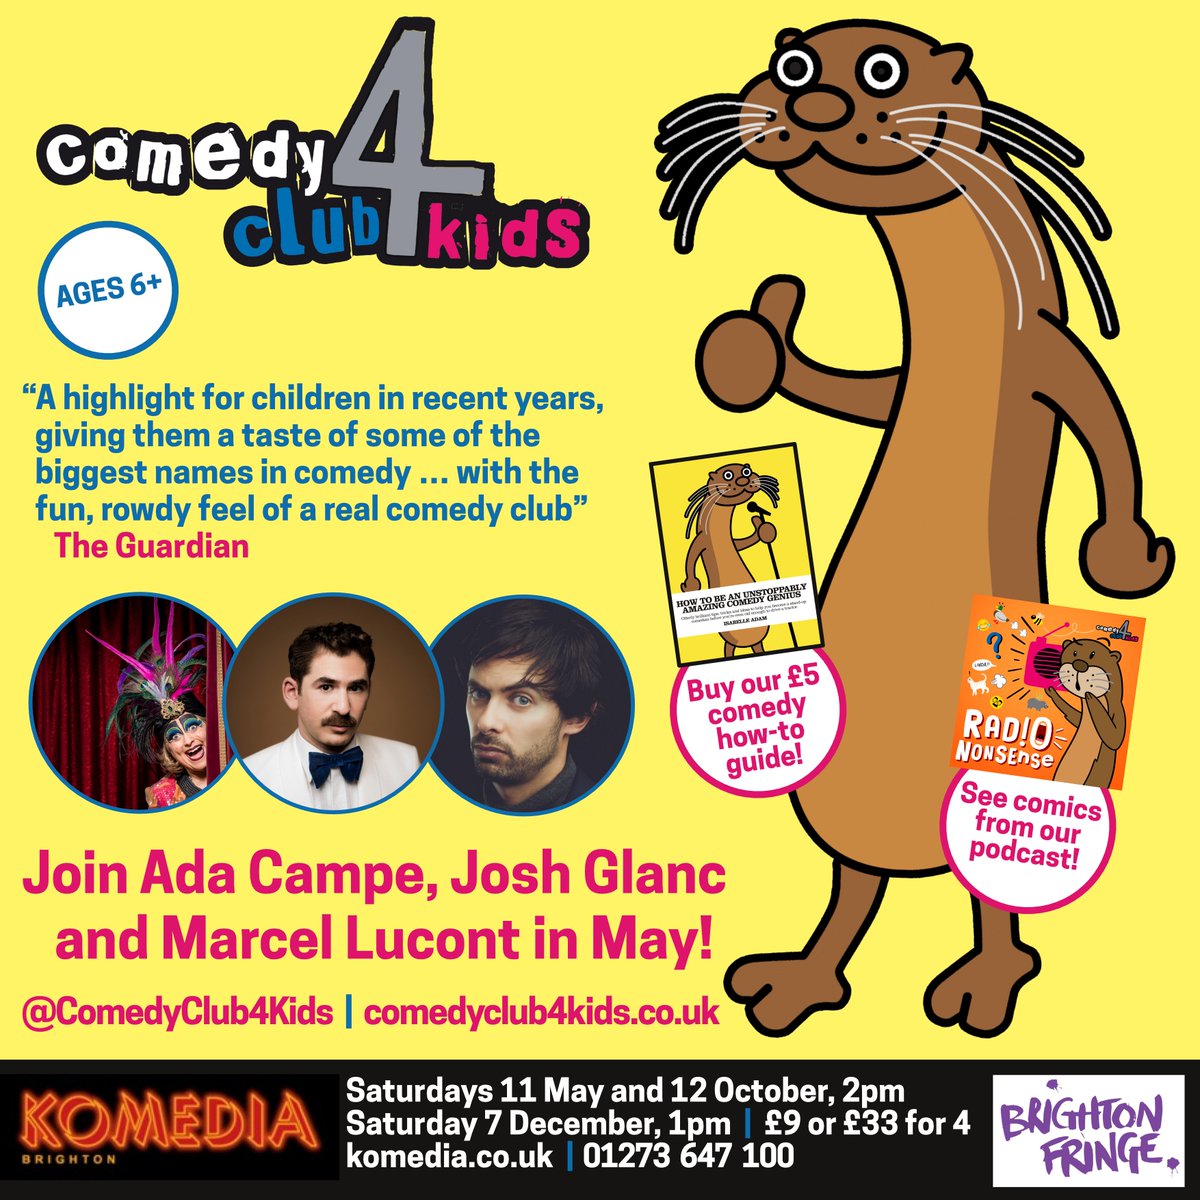 Brighton! KIDS! Tickets are selling fast for our @brightonfringe gig at @KomediaBrighton on Saturday 11th May! Join us at 2pm for comedy excellence with @AdaCampe, @JoshGlanc and @MarcelLucont! 🎟️komedia.co.uk/brighton/comed…